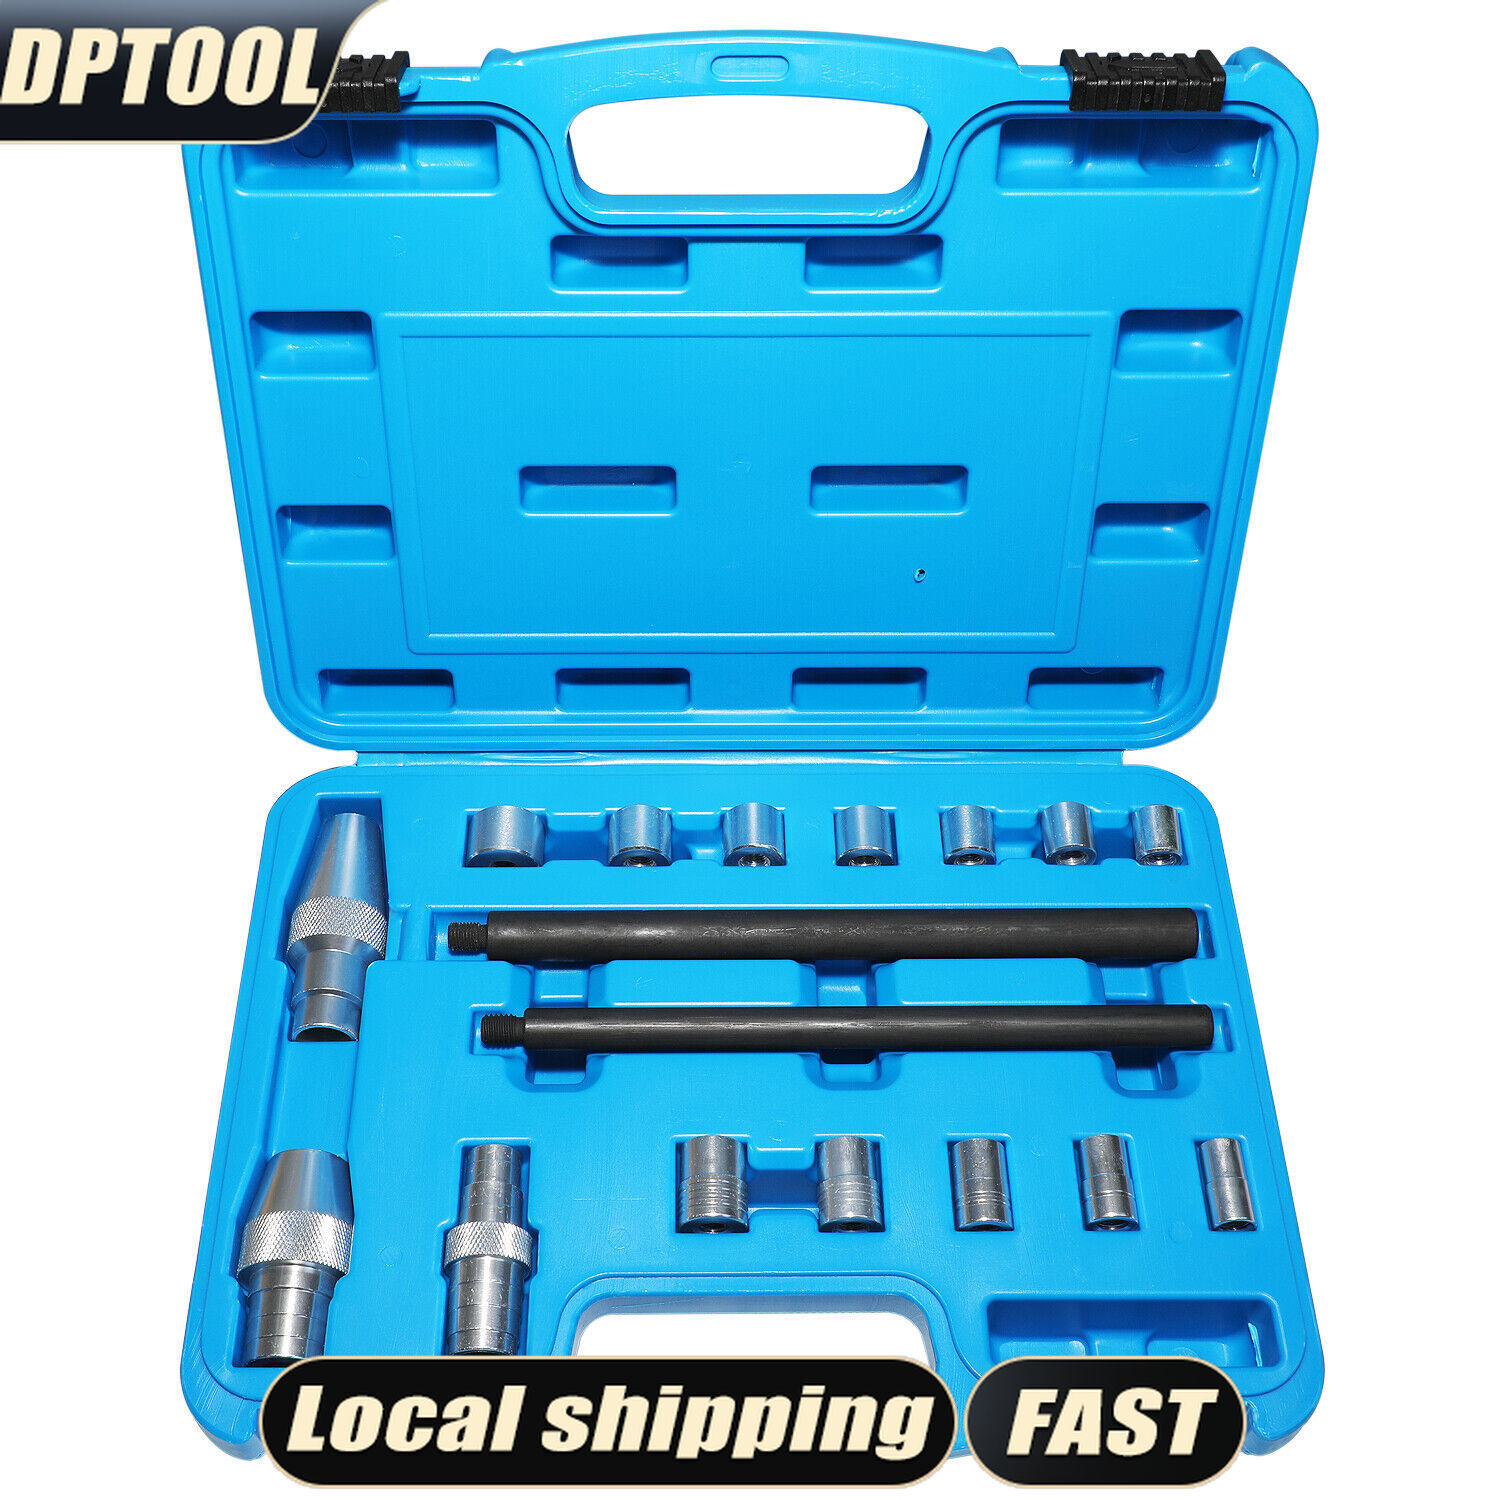 Clutch Alignment Aligning Tool Universal Set Replacing Clutches 17pc Metric SAE